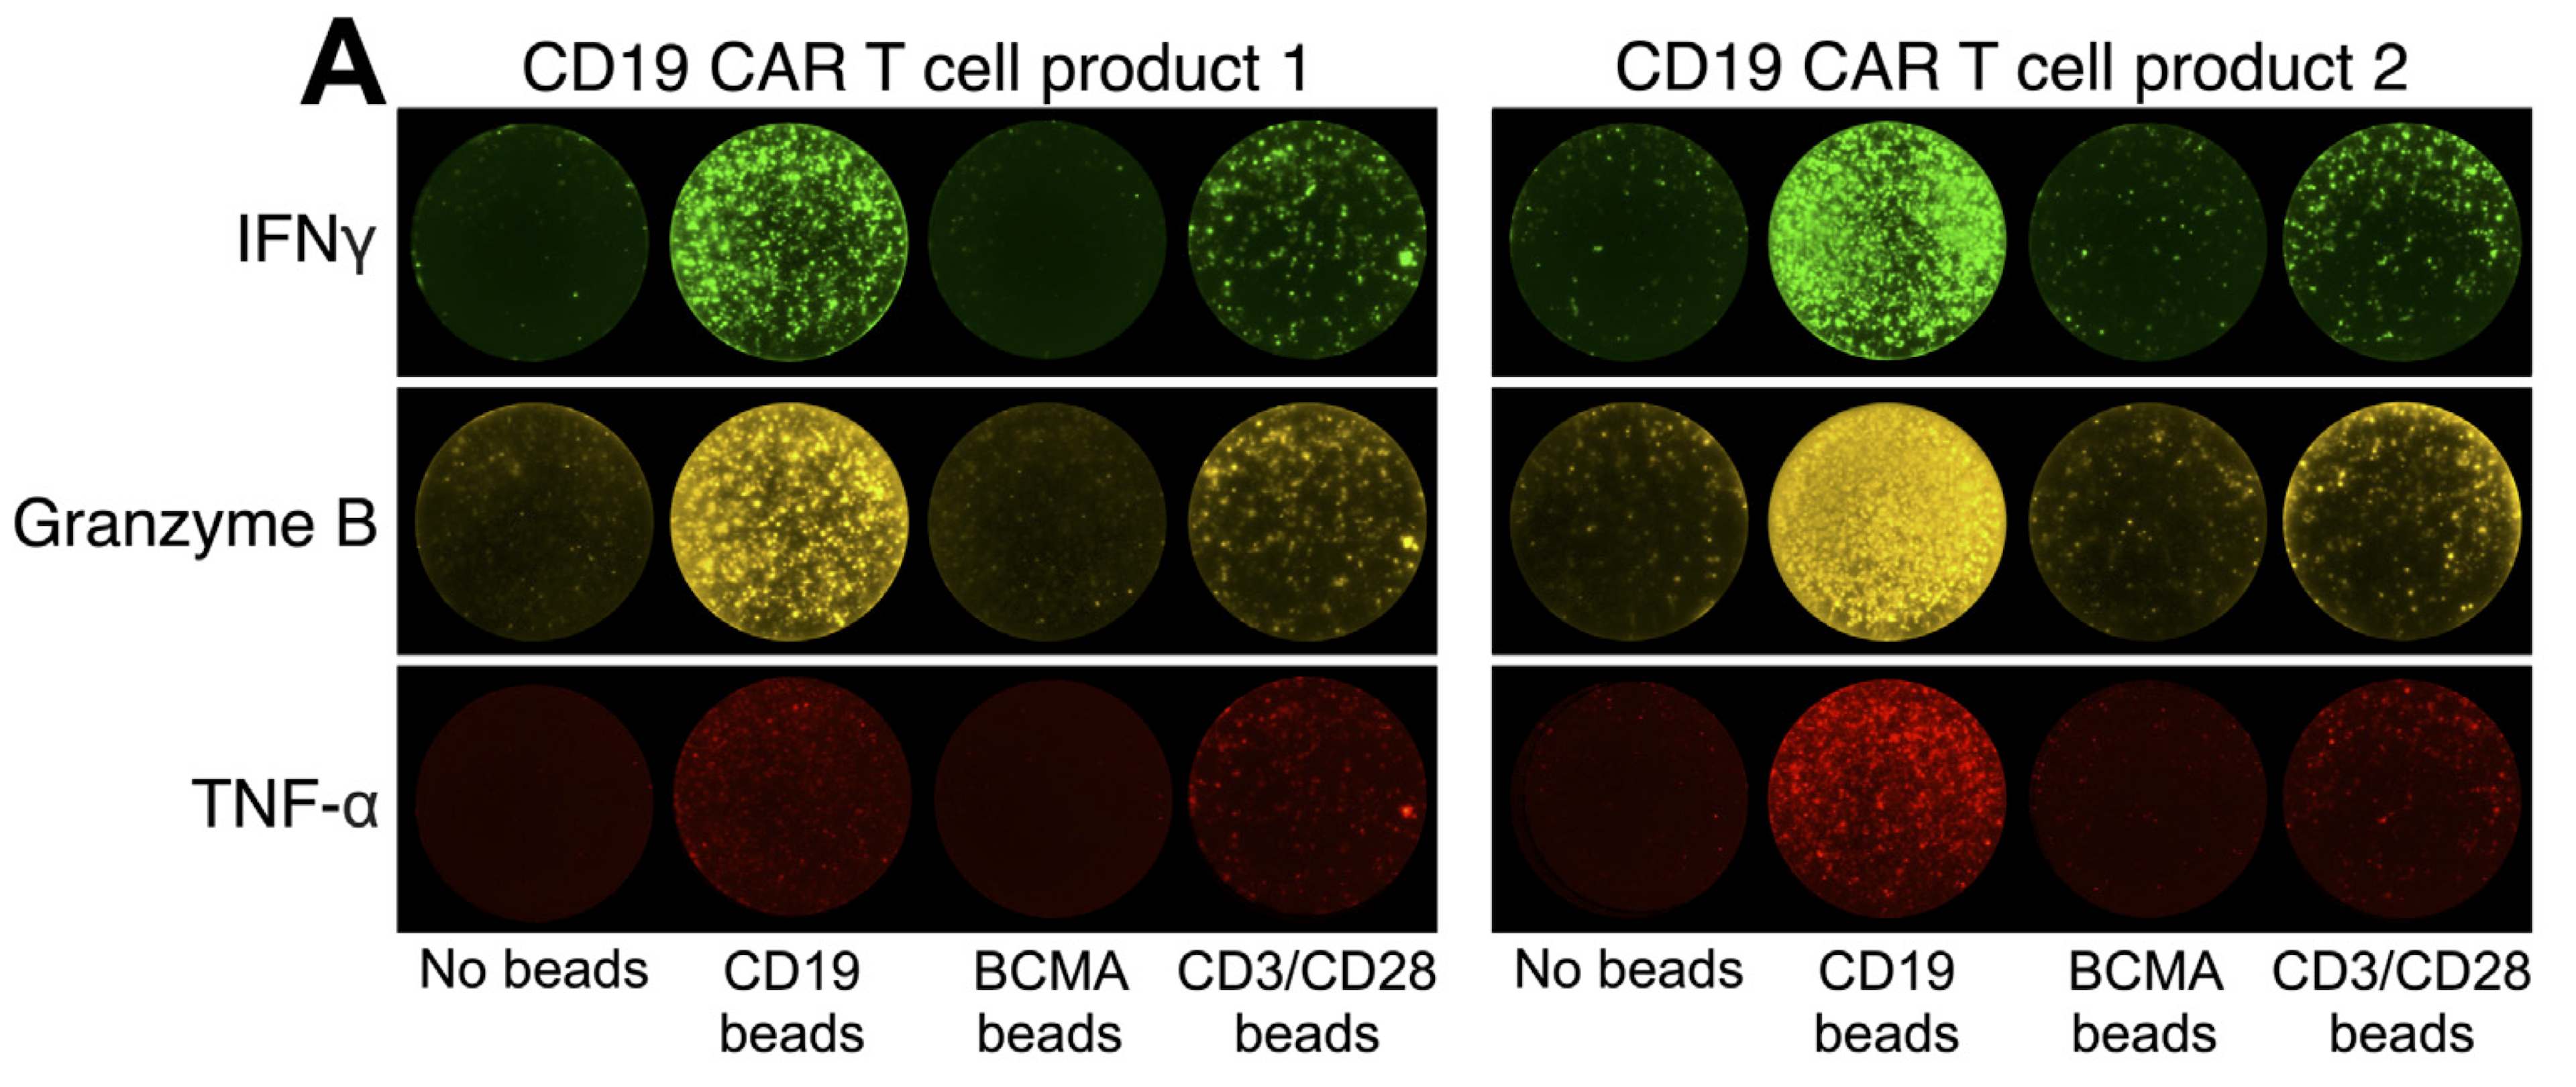 IFN-gamma/TNF-alpha/Granzyme B emerged as the most pertinent for characterizing clinical-grade CD19-targeted CAR-T cell products.